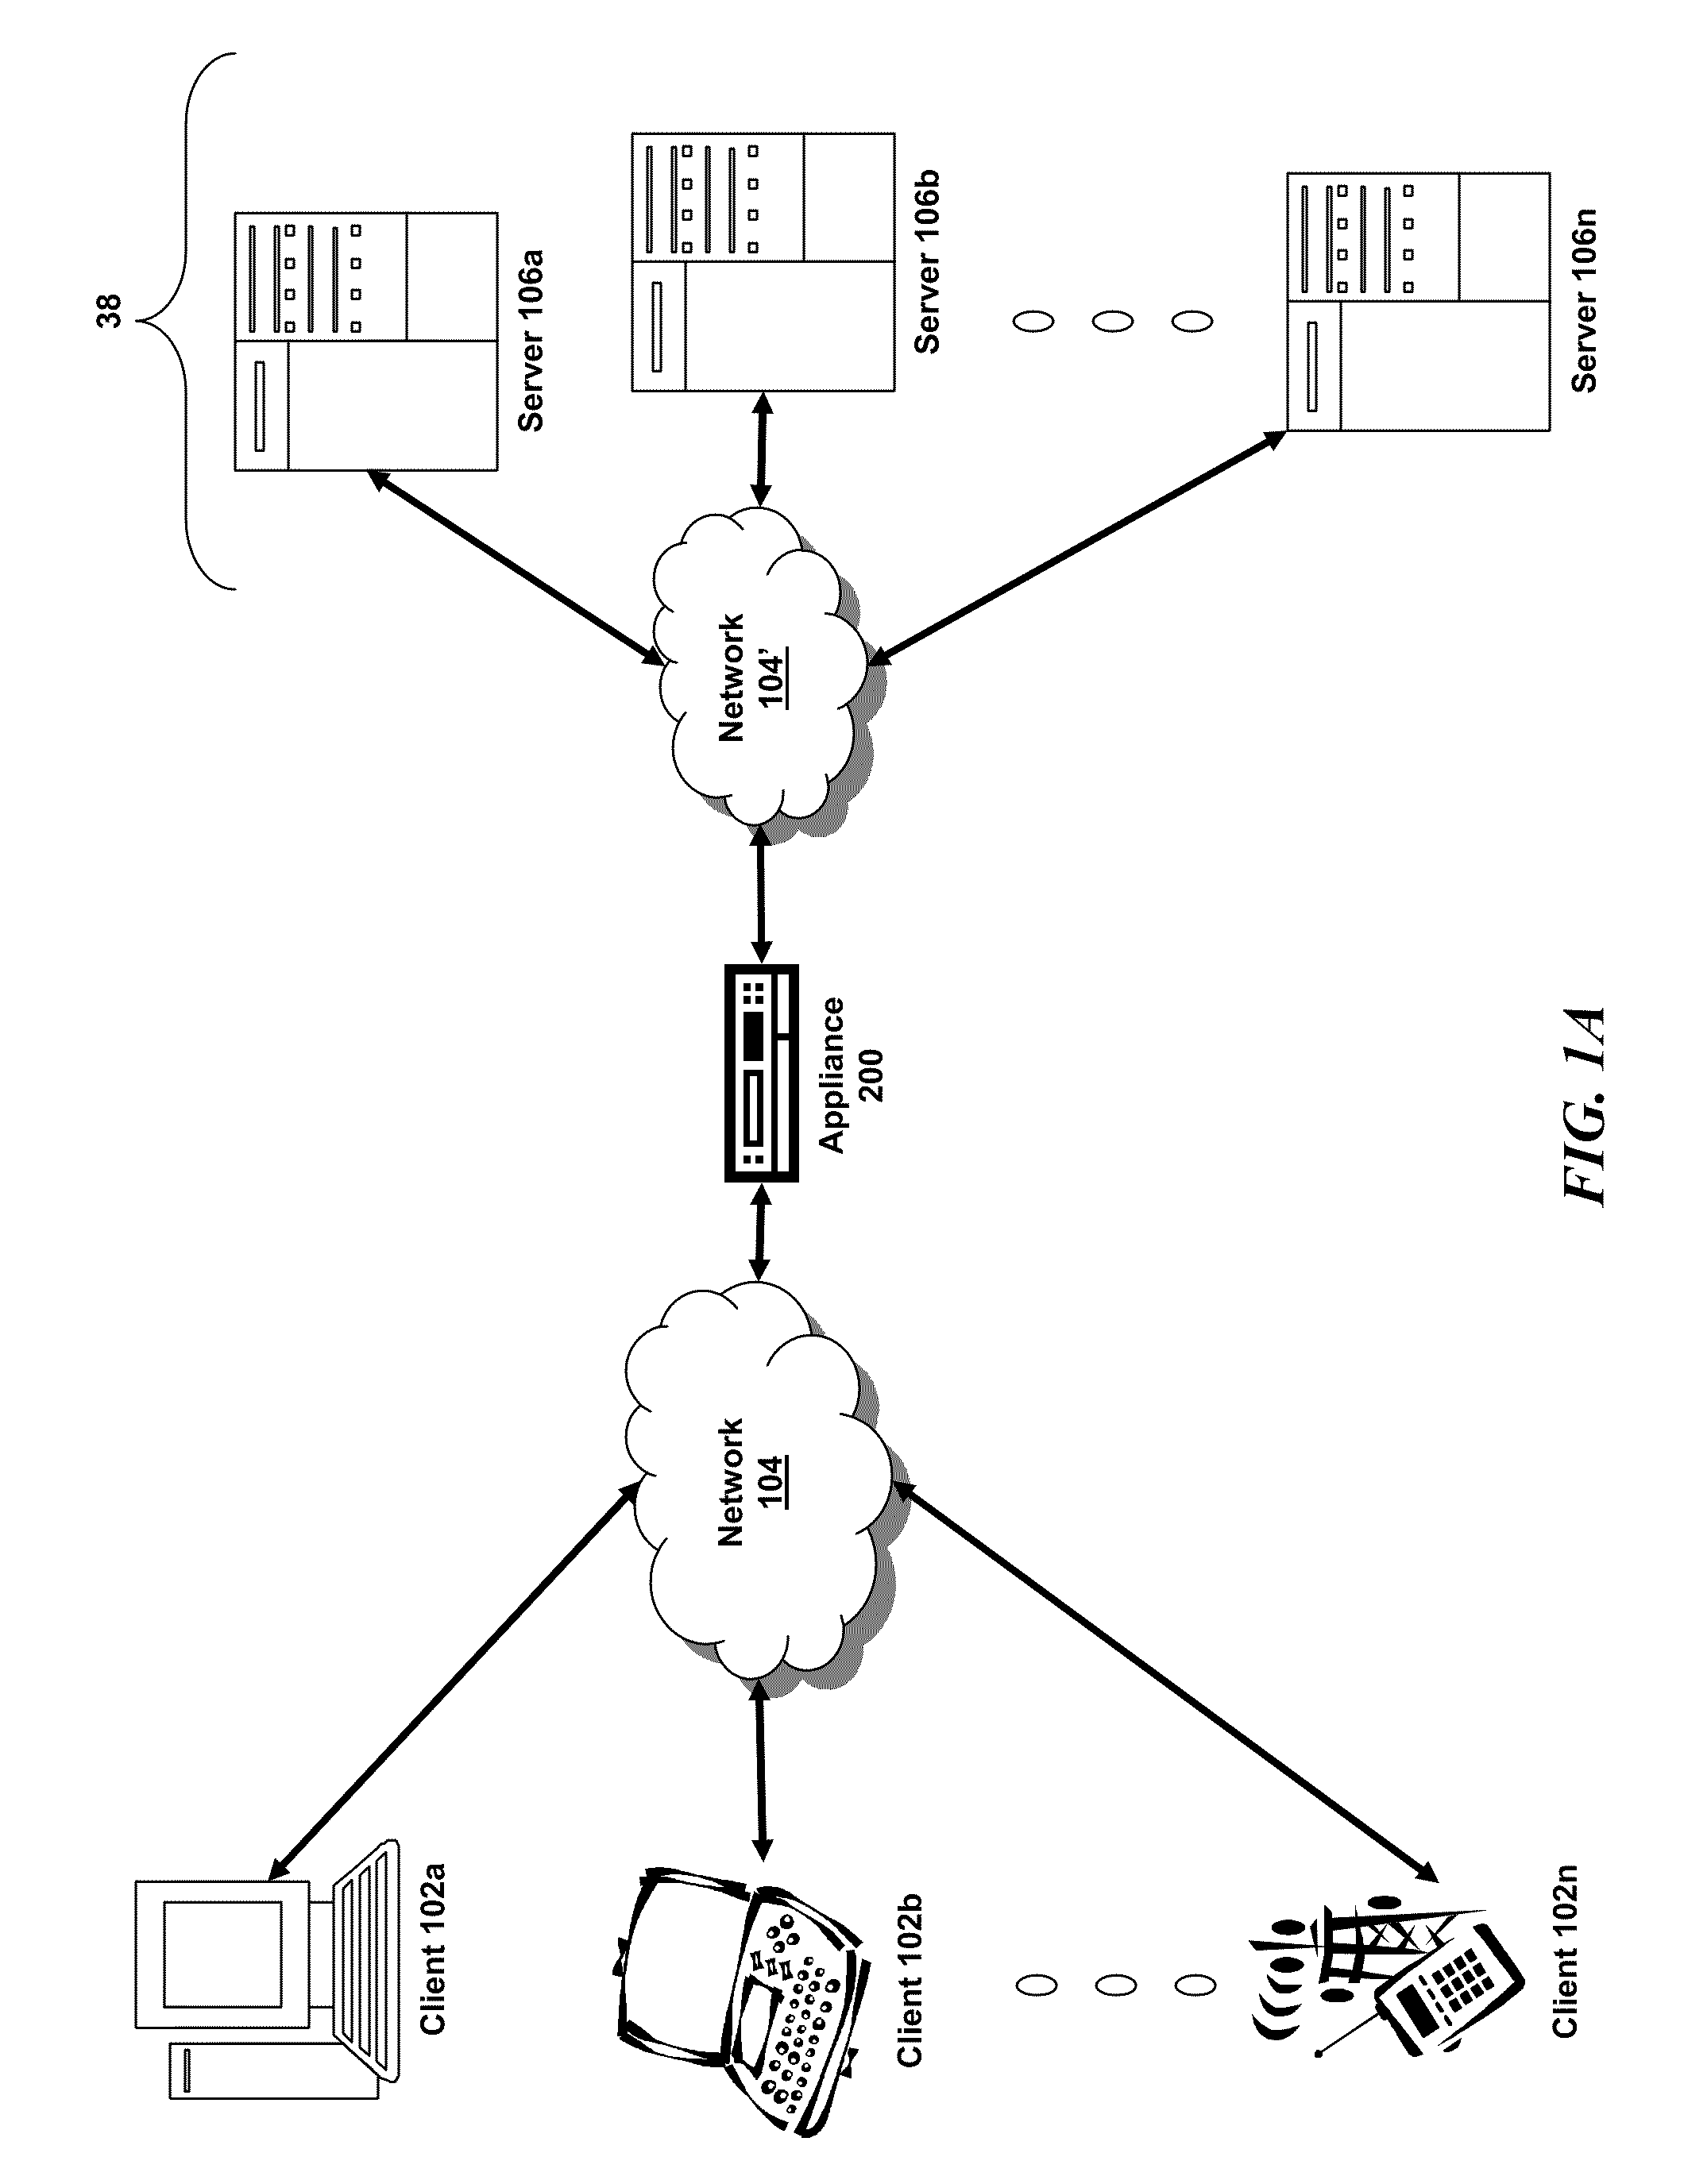 Systems and methods for providing a visualizer for rules of an application firewall